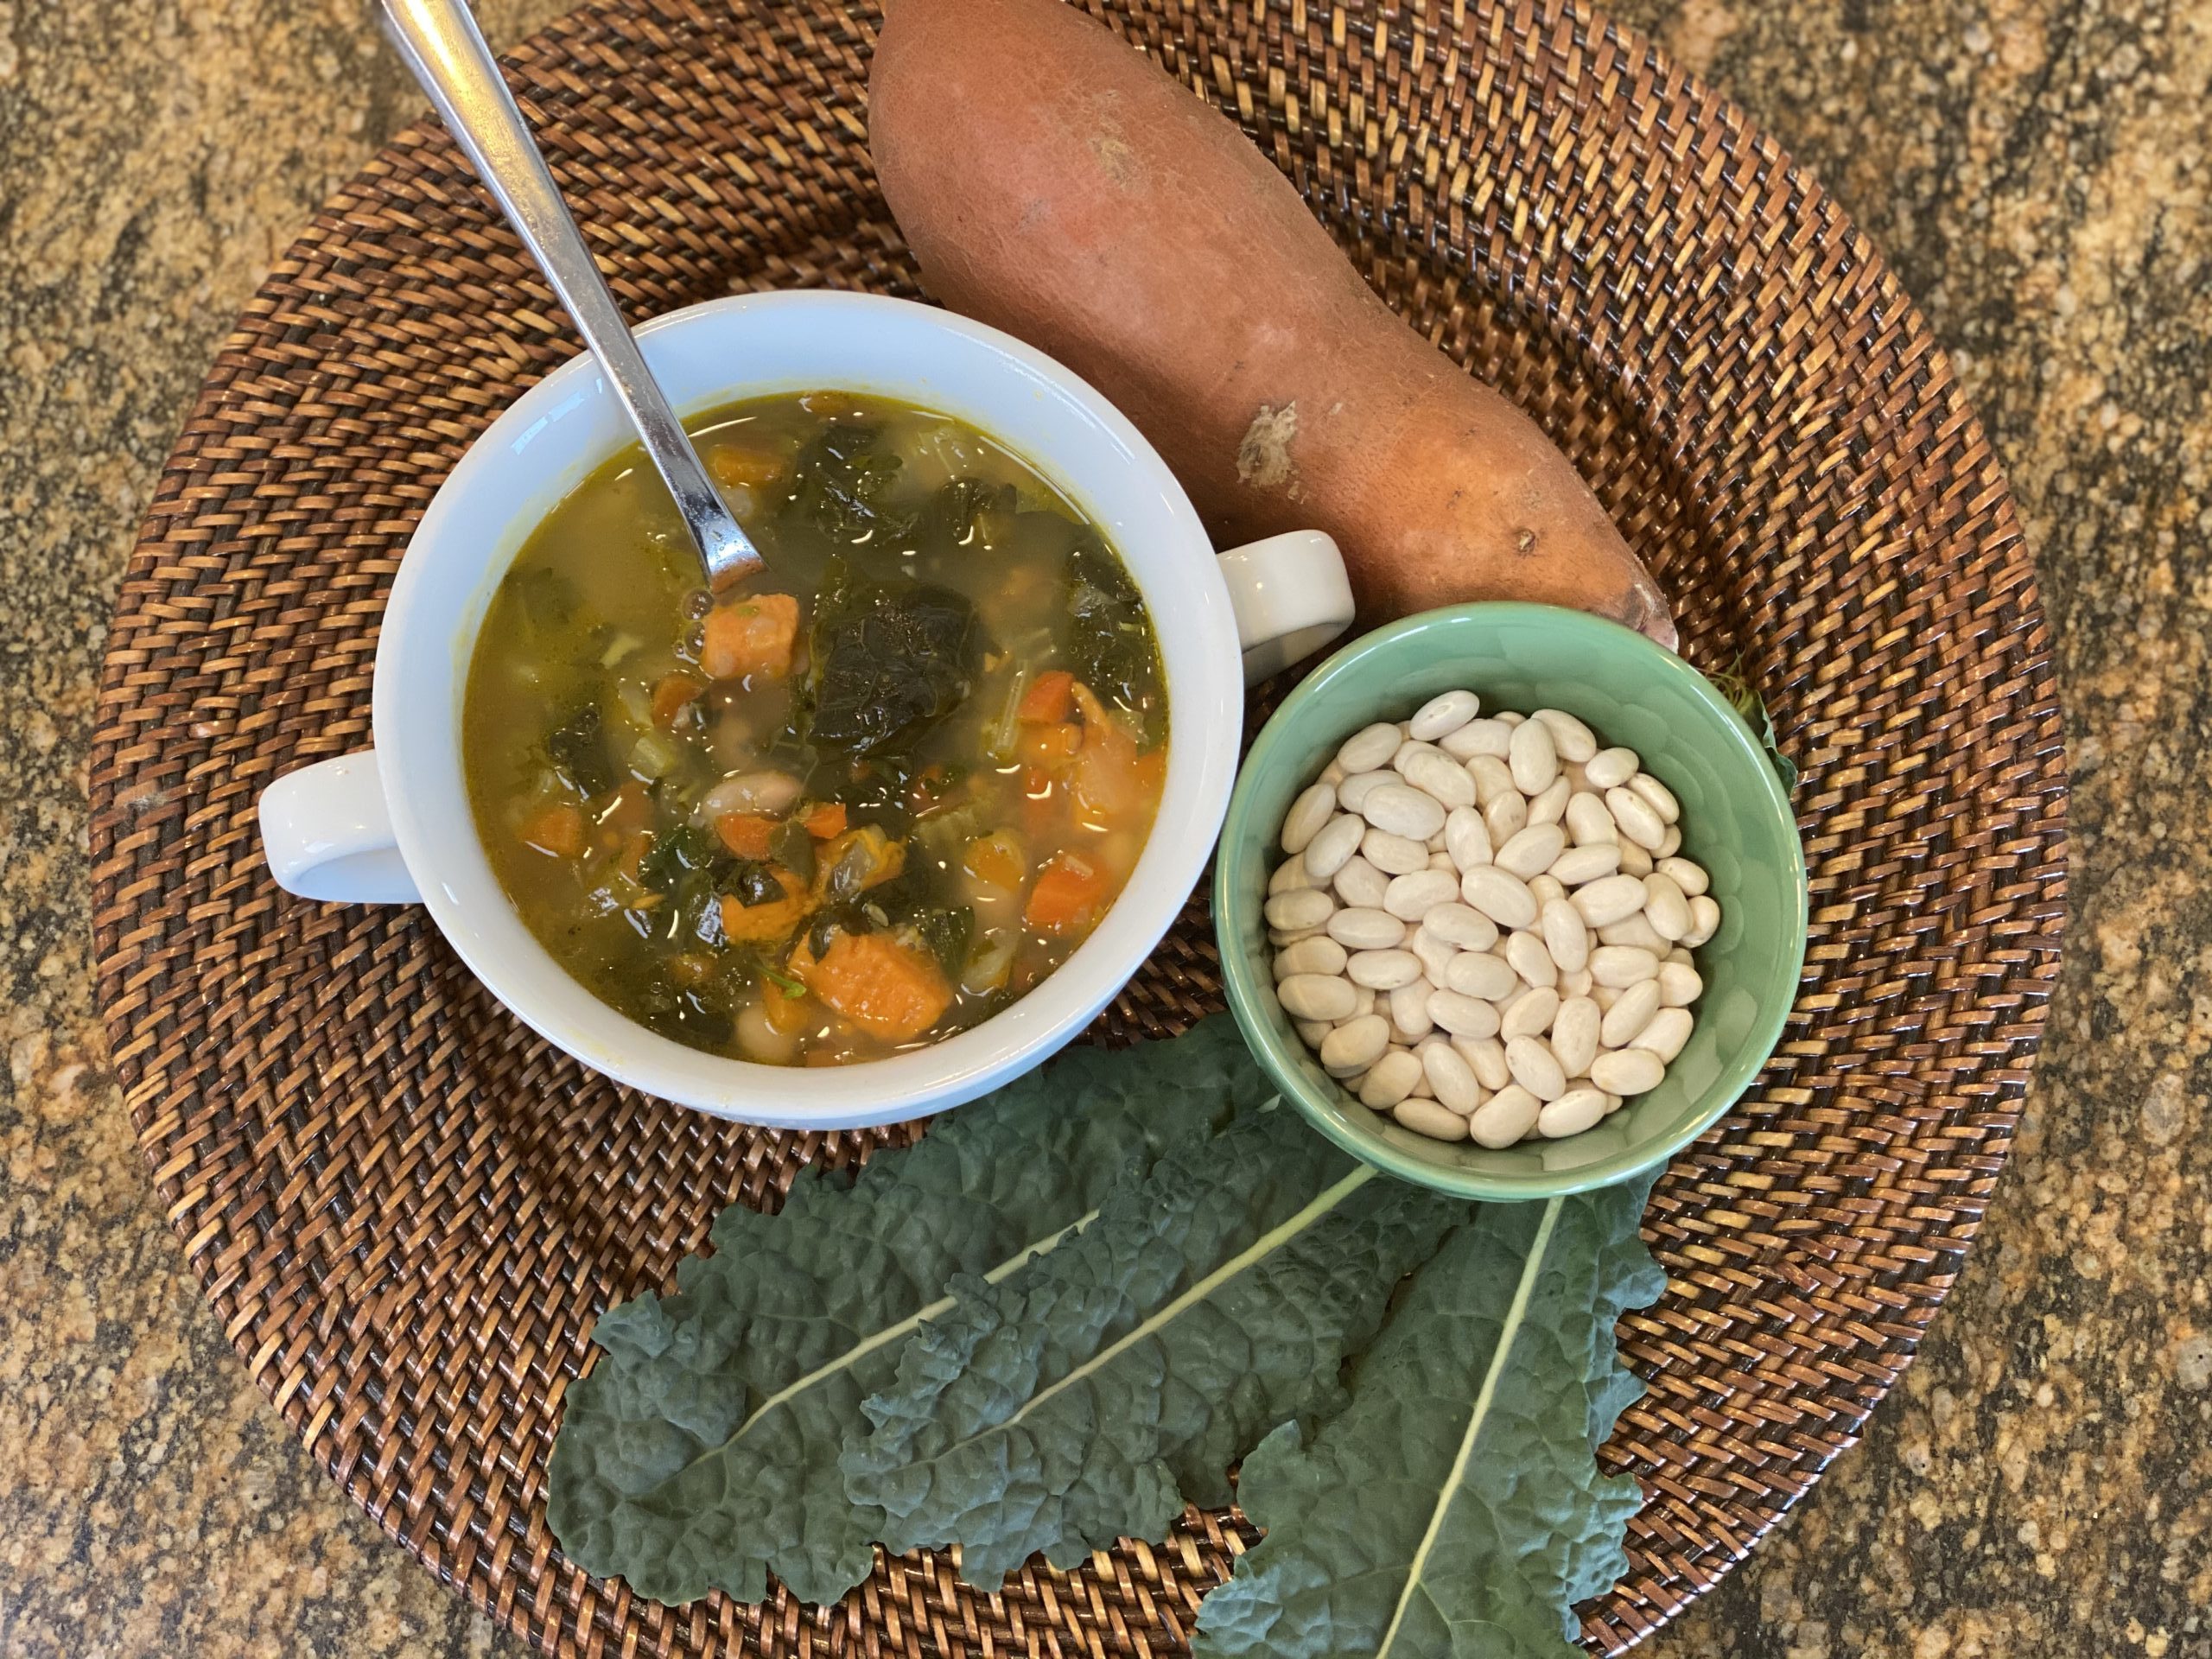 White Bean and Kale Soup – Super Yummy & Nutritious